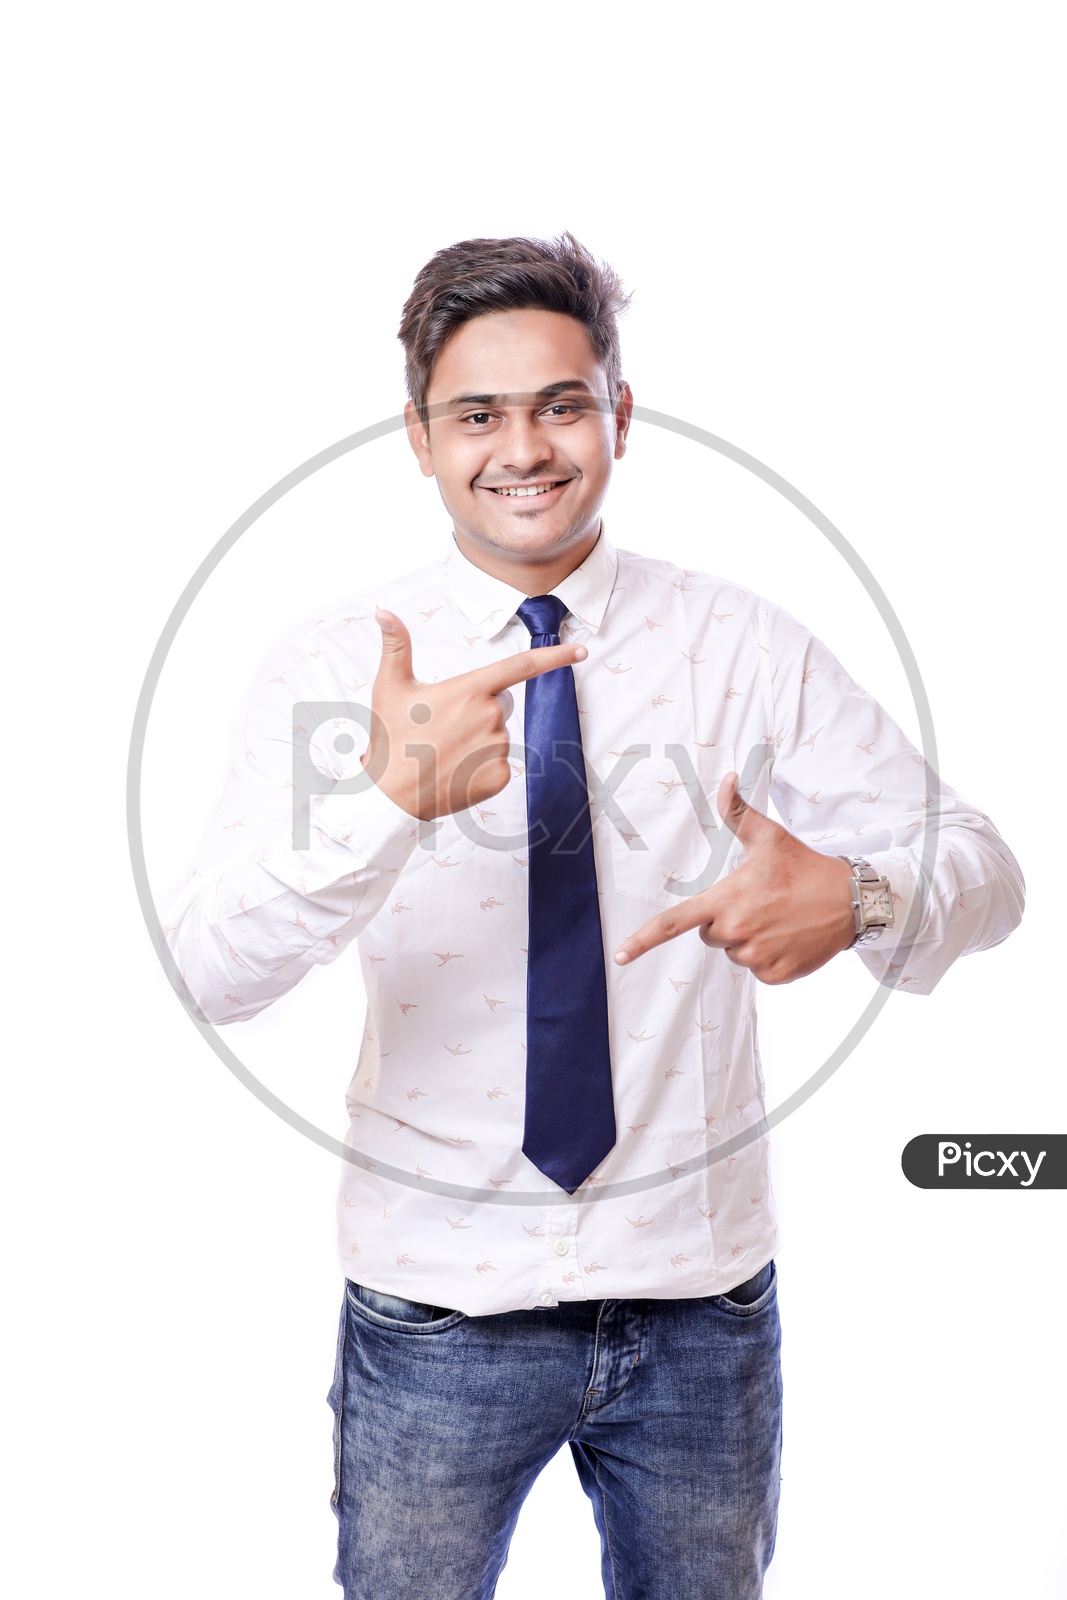 Portrait Of A Confident Young man in Formal wear  With Expression and Hand Signs  and Gestures On An Isolated  White  Background